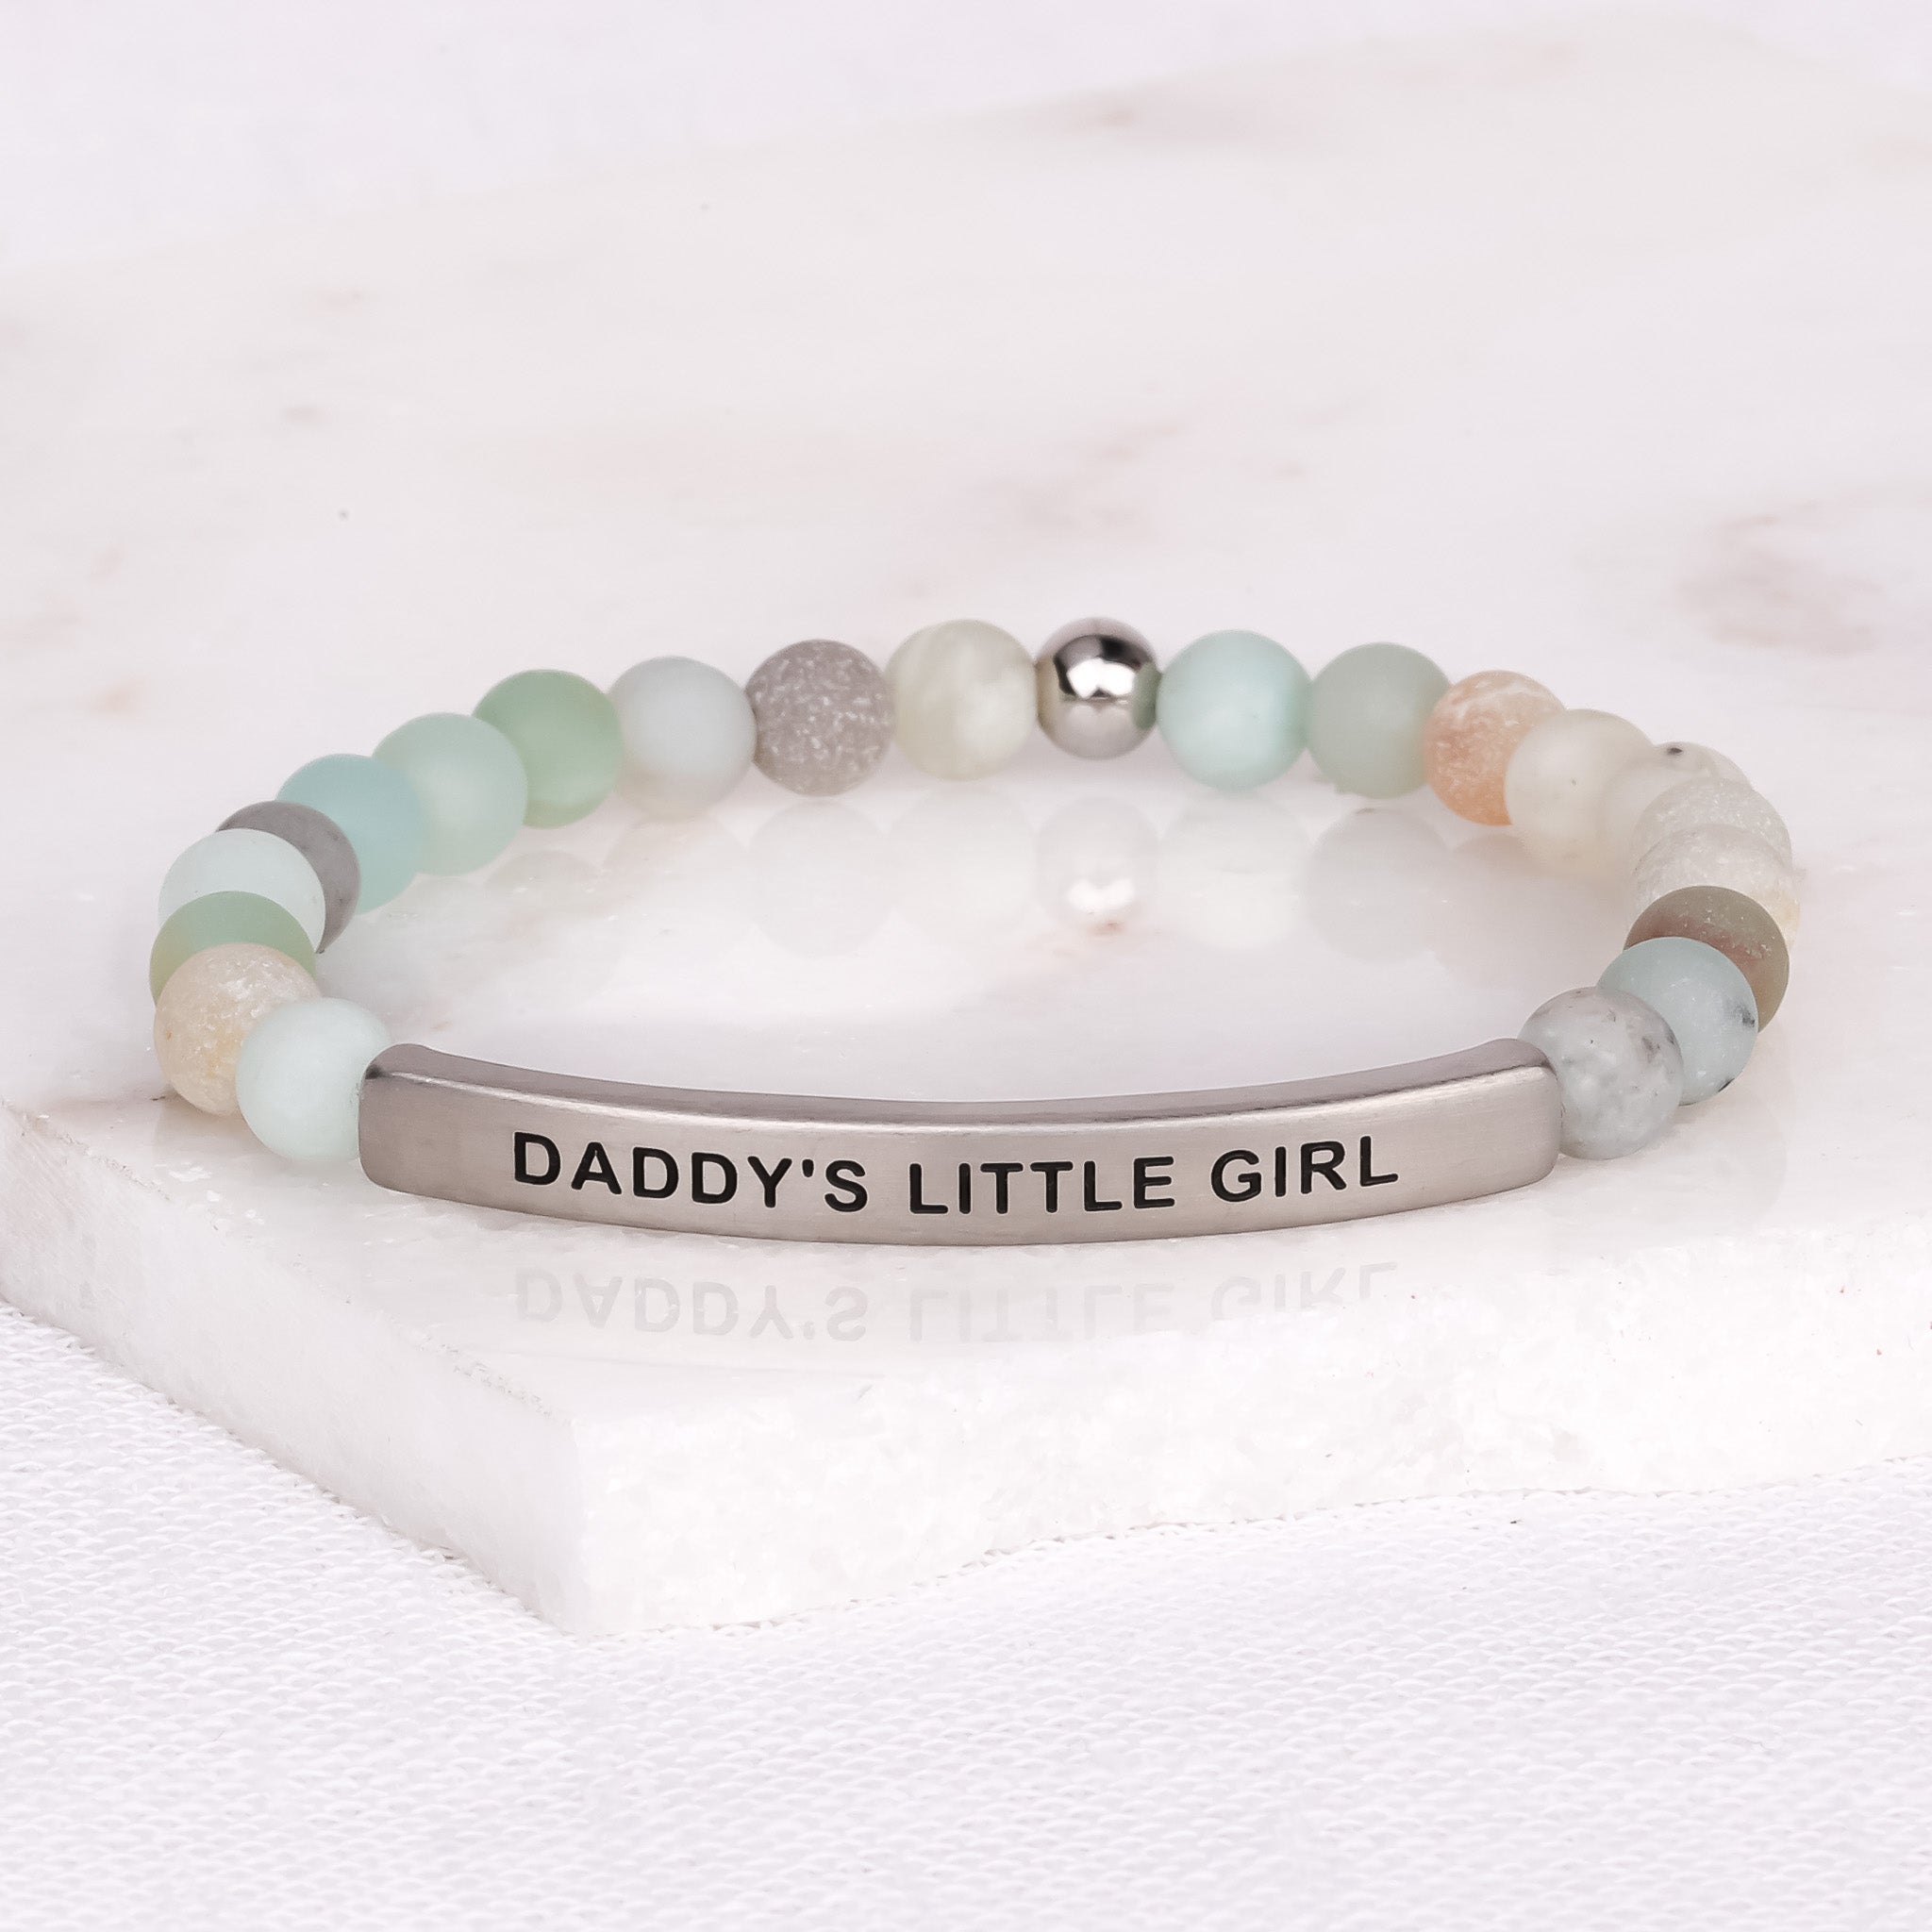 Inspire Me Bracelets - Daddy's Little Girl-Inspirational Bead Bracelet Turquoise ite / Small (6in-7in) Average Woman Size